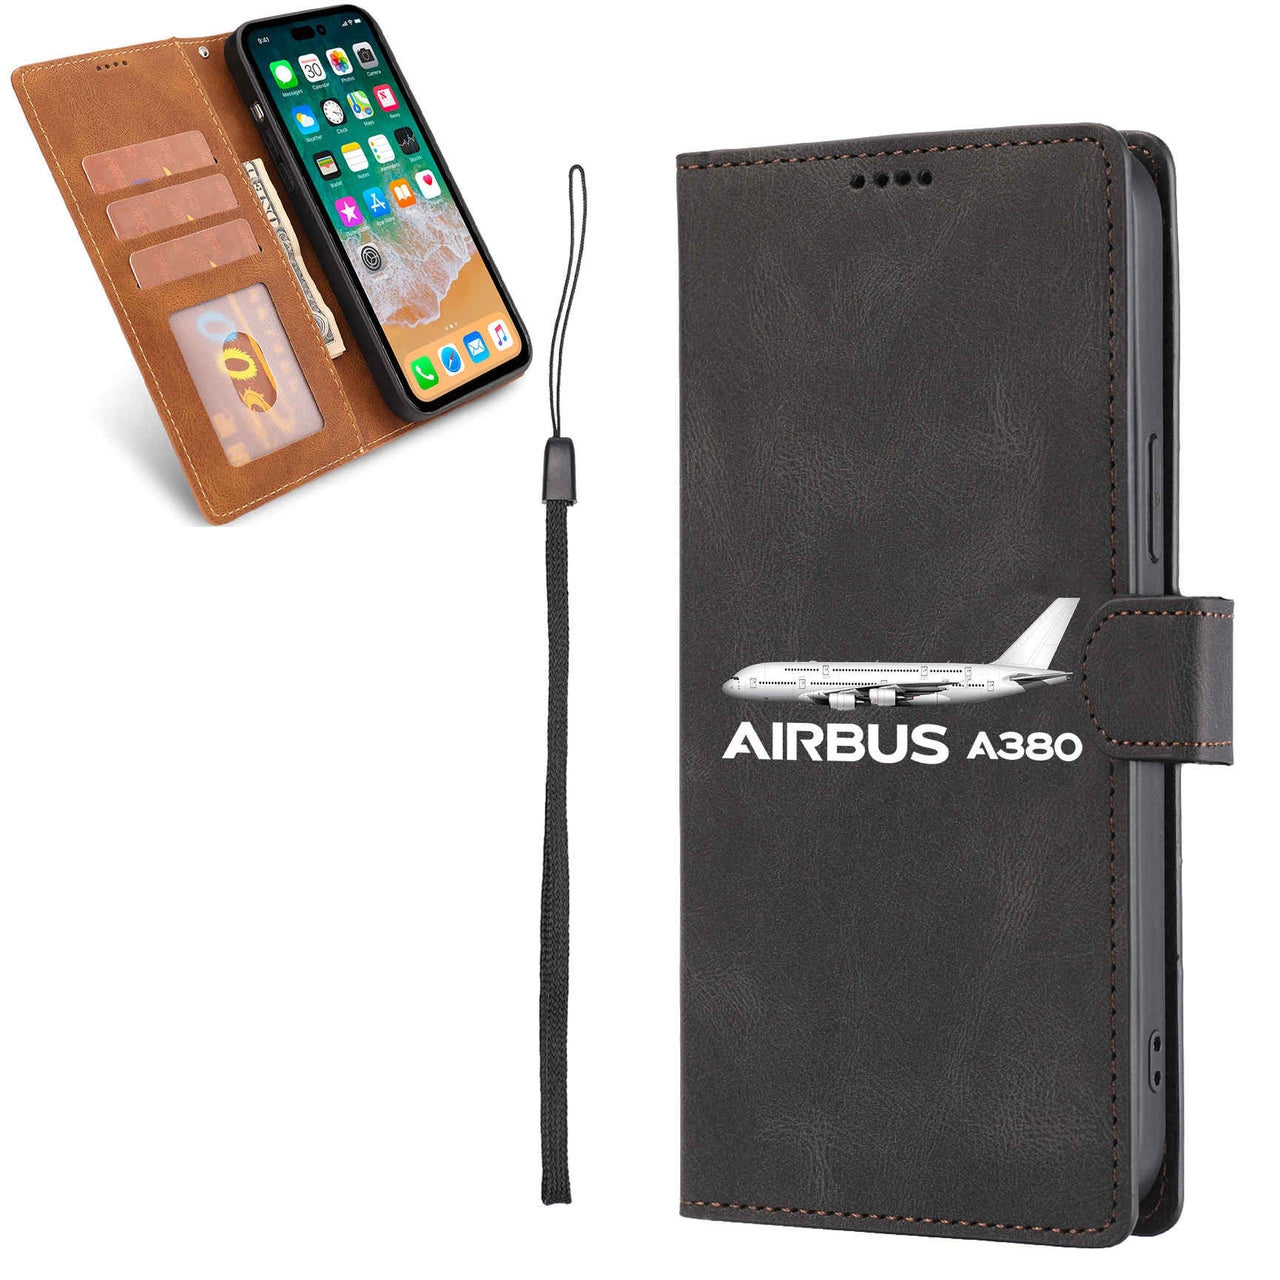 The Airbus A380 Designed Leather Samsung S & Note Cases